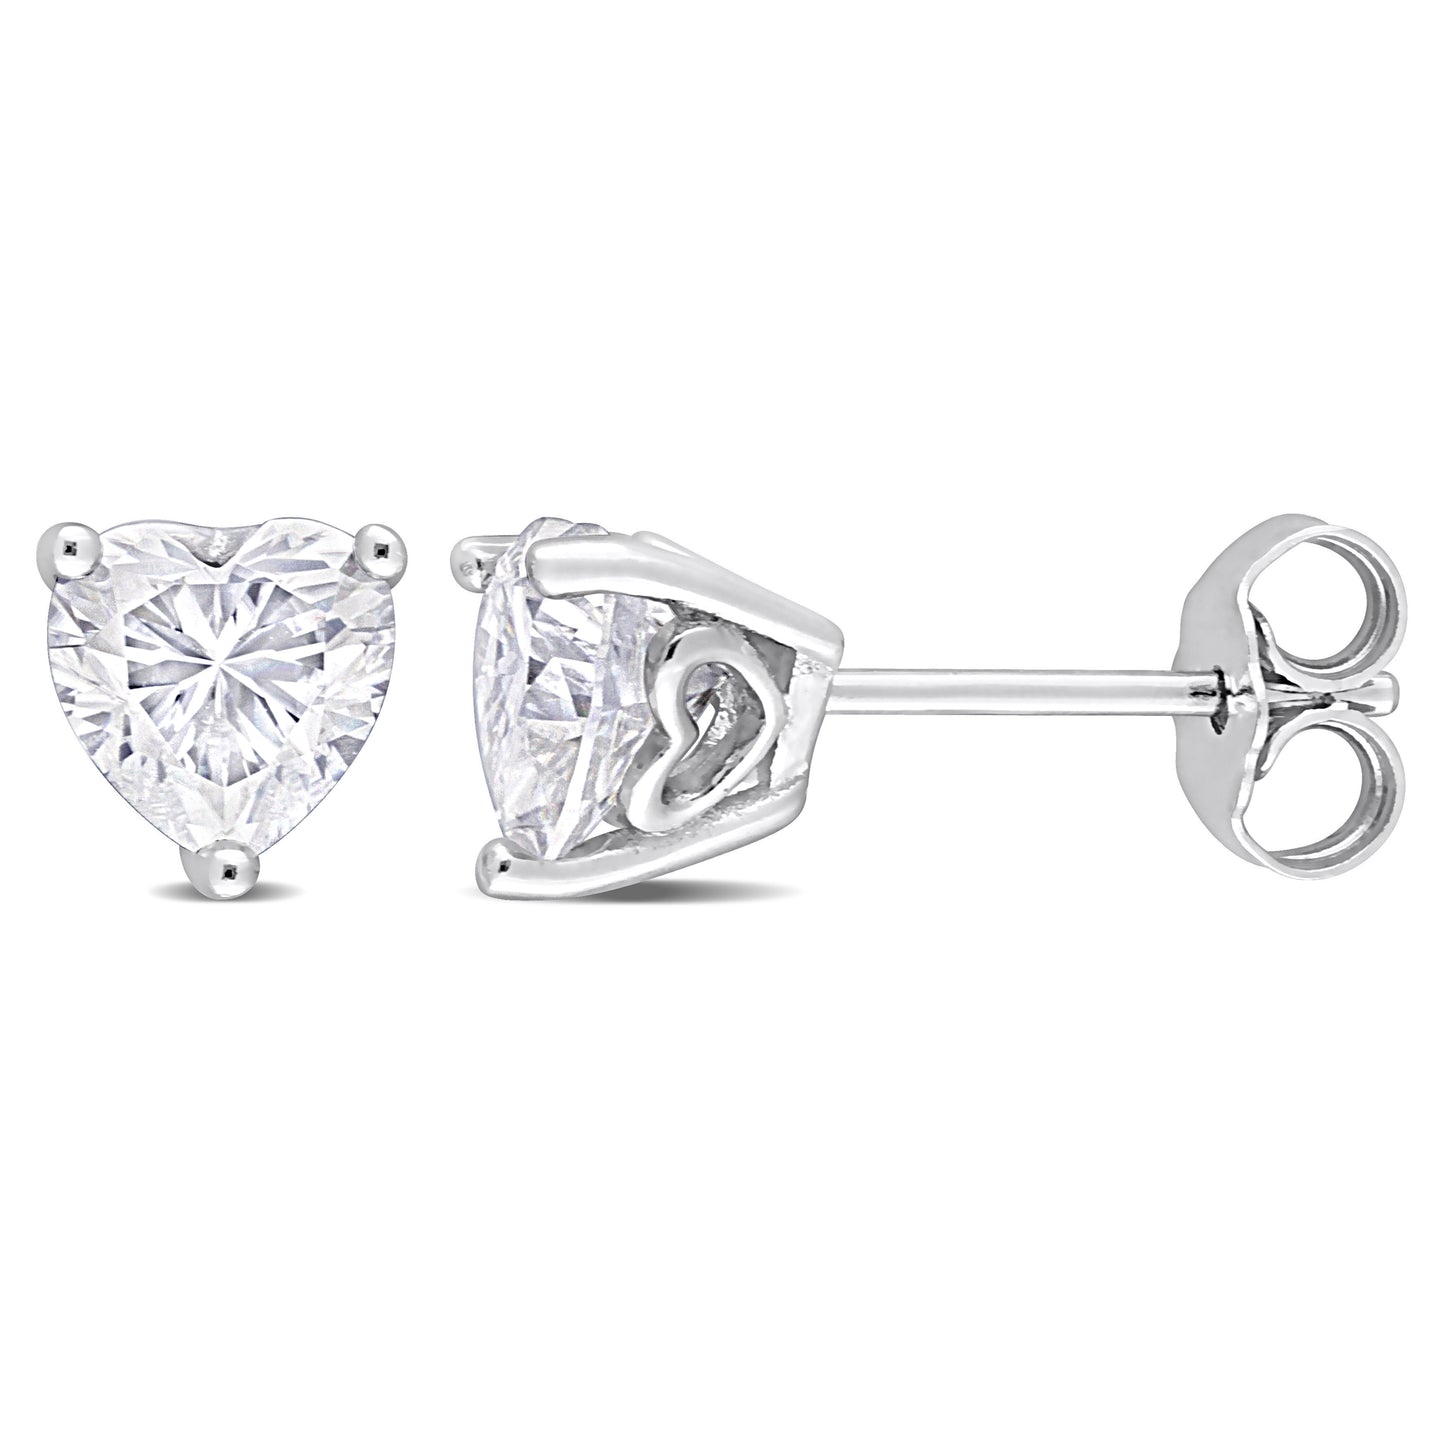 1 1/2ct Heart Cut Moissanite Studs in Sterling Silver